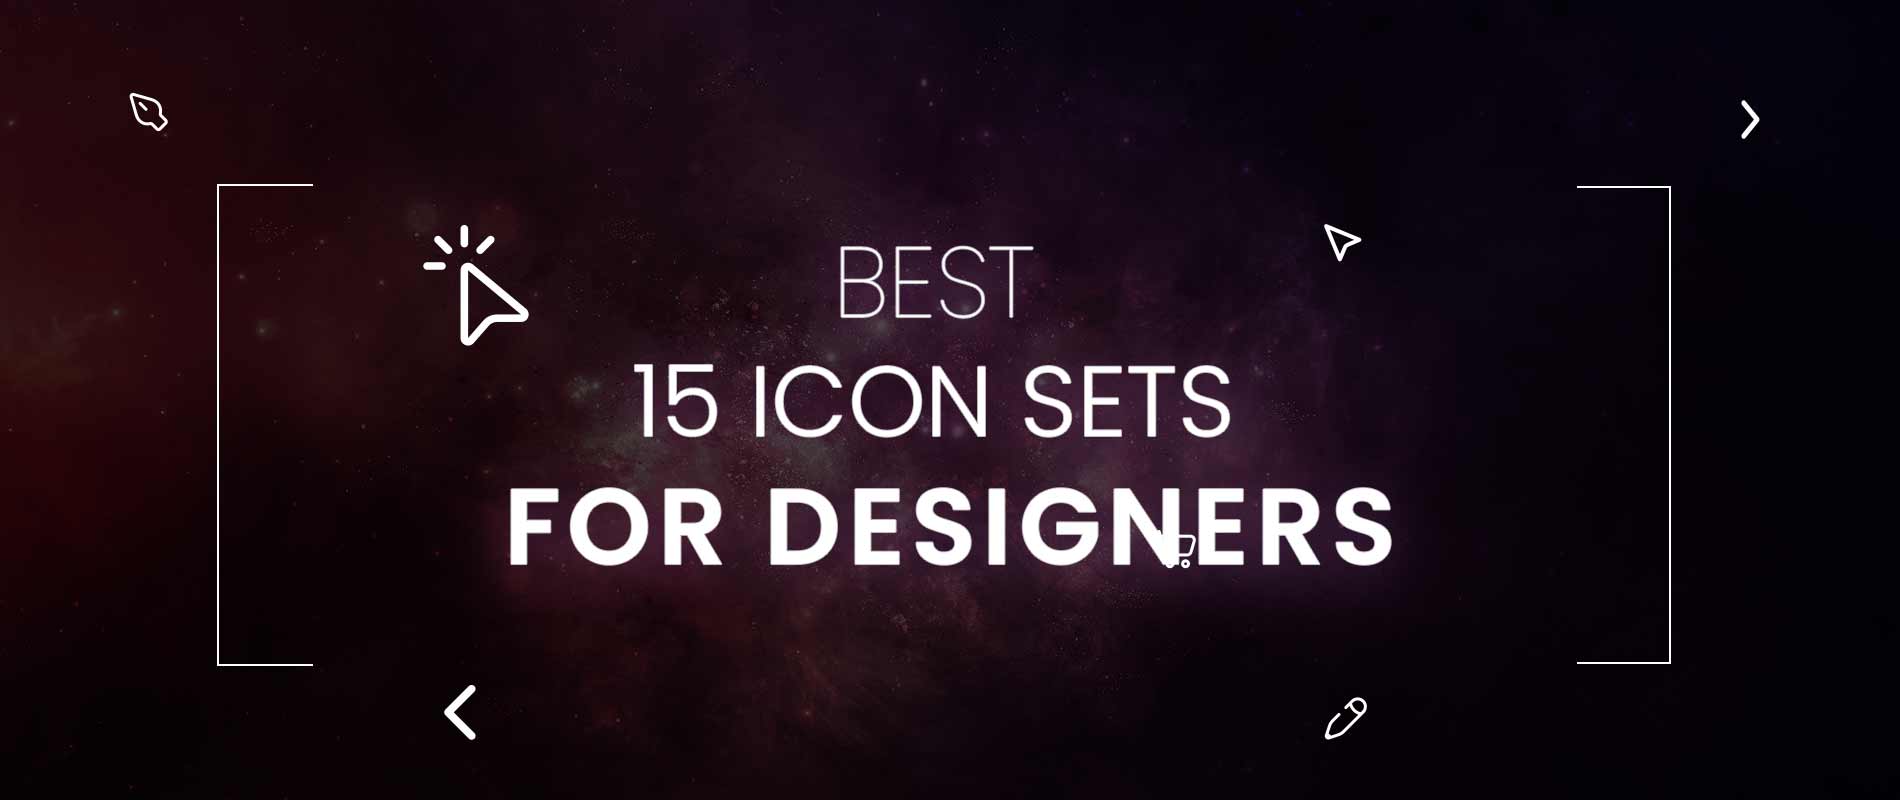 You are currently viewing Best 15 Icon Sets for Designers